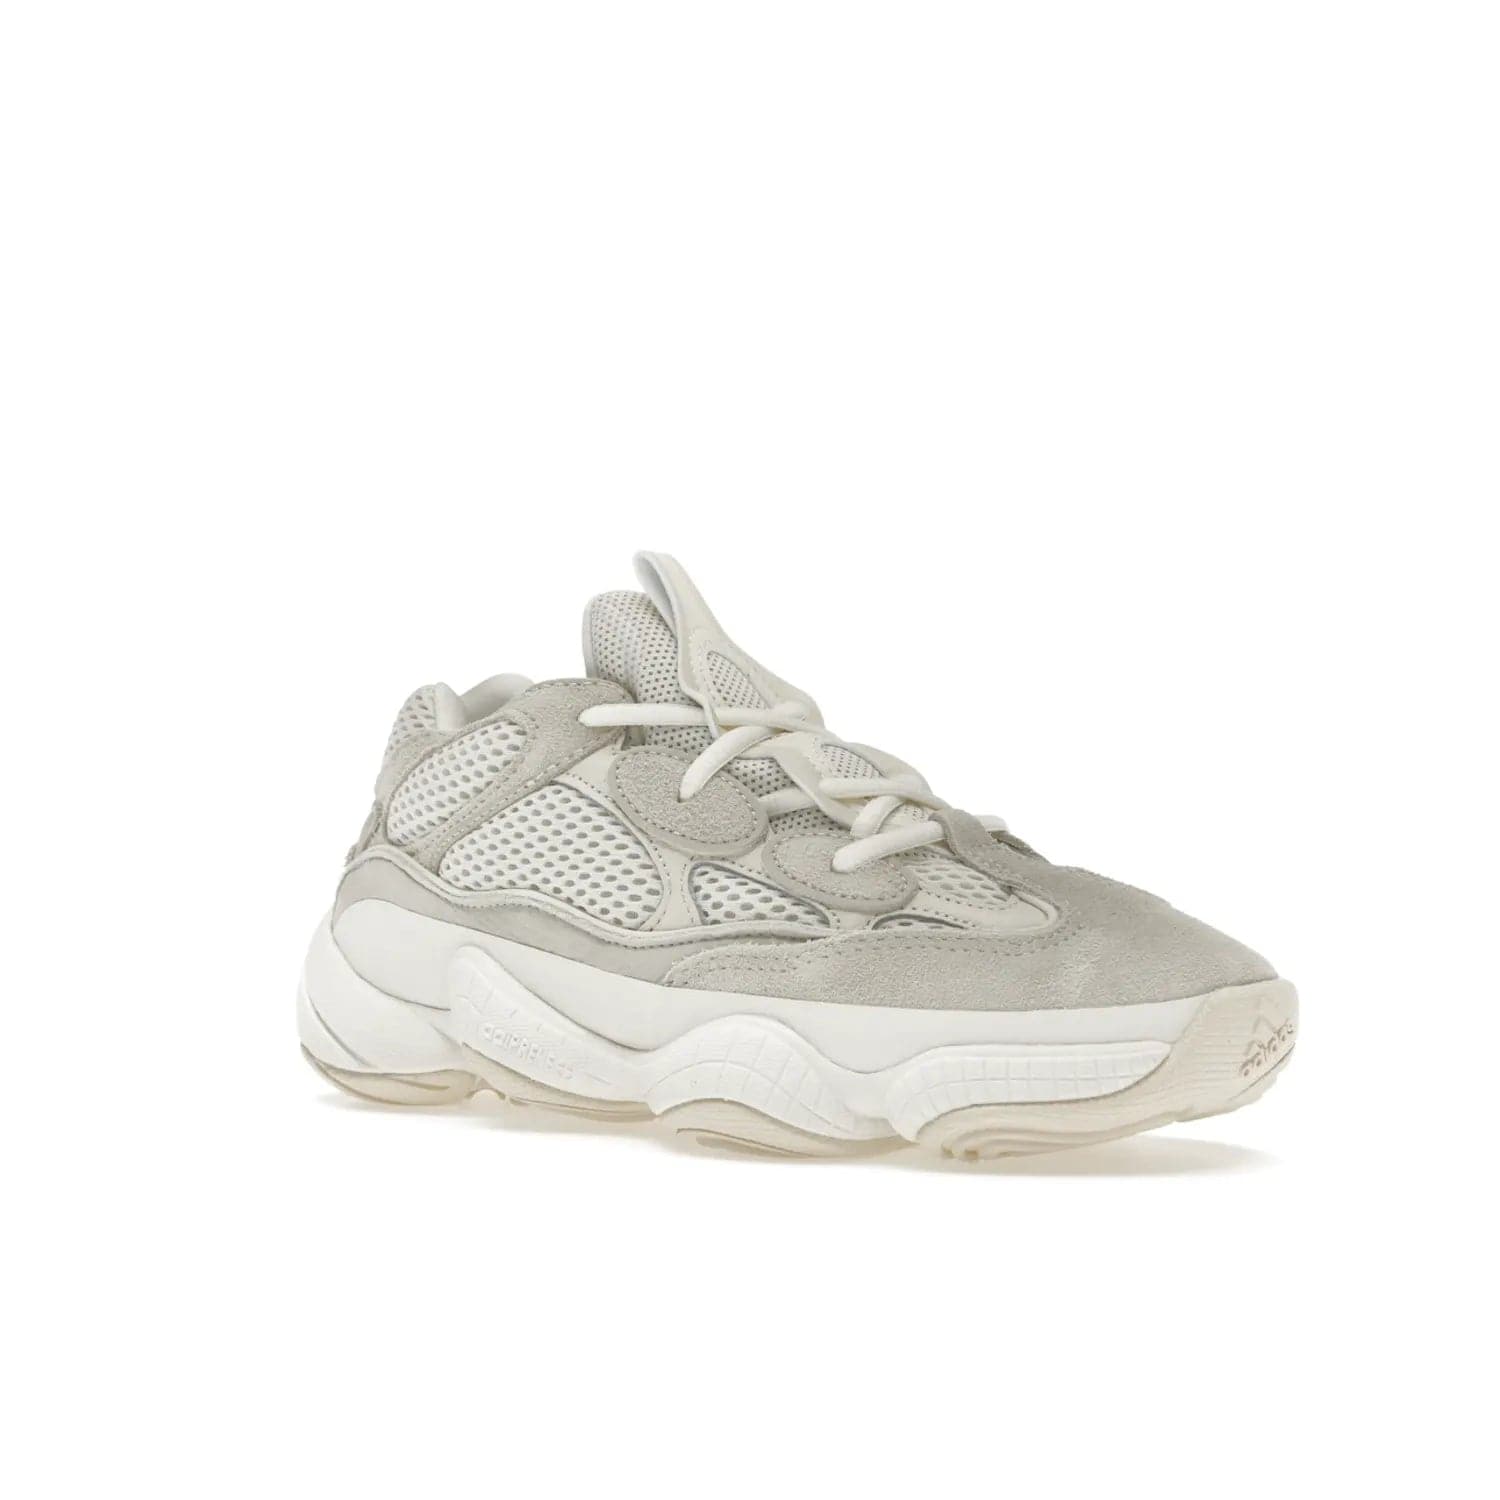 adidas Yeezy 500 Bone White (2023) - Image 5 - Only at www.BallersClubKickz.com - Experience the unique style of the adidas Yeezy 500 Bone White. Featuring a Bone White colorway and white accents, durable construction and comfortably light feel. Get ready to make a statement in 2023.